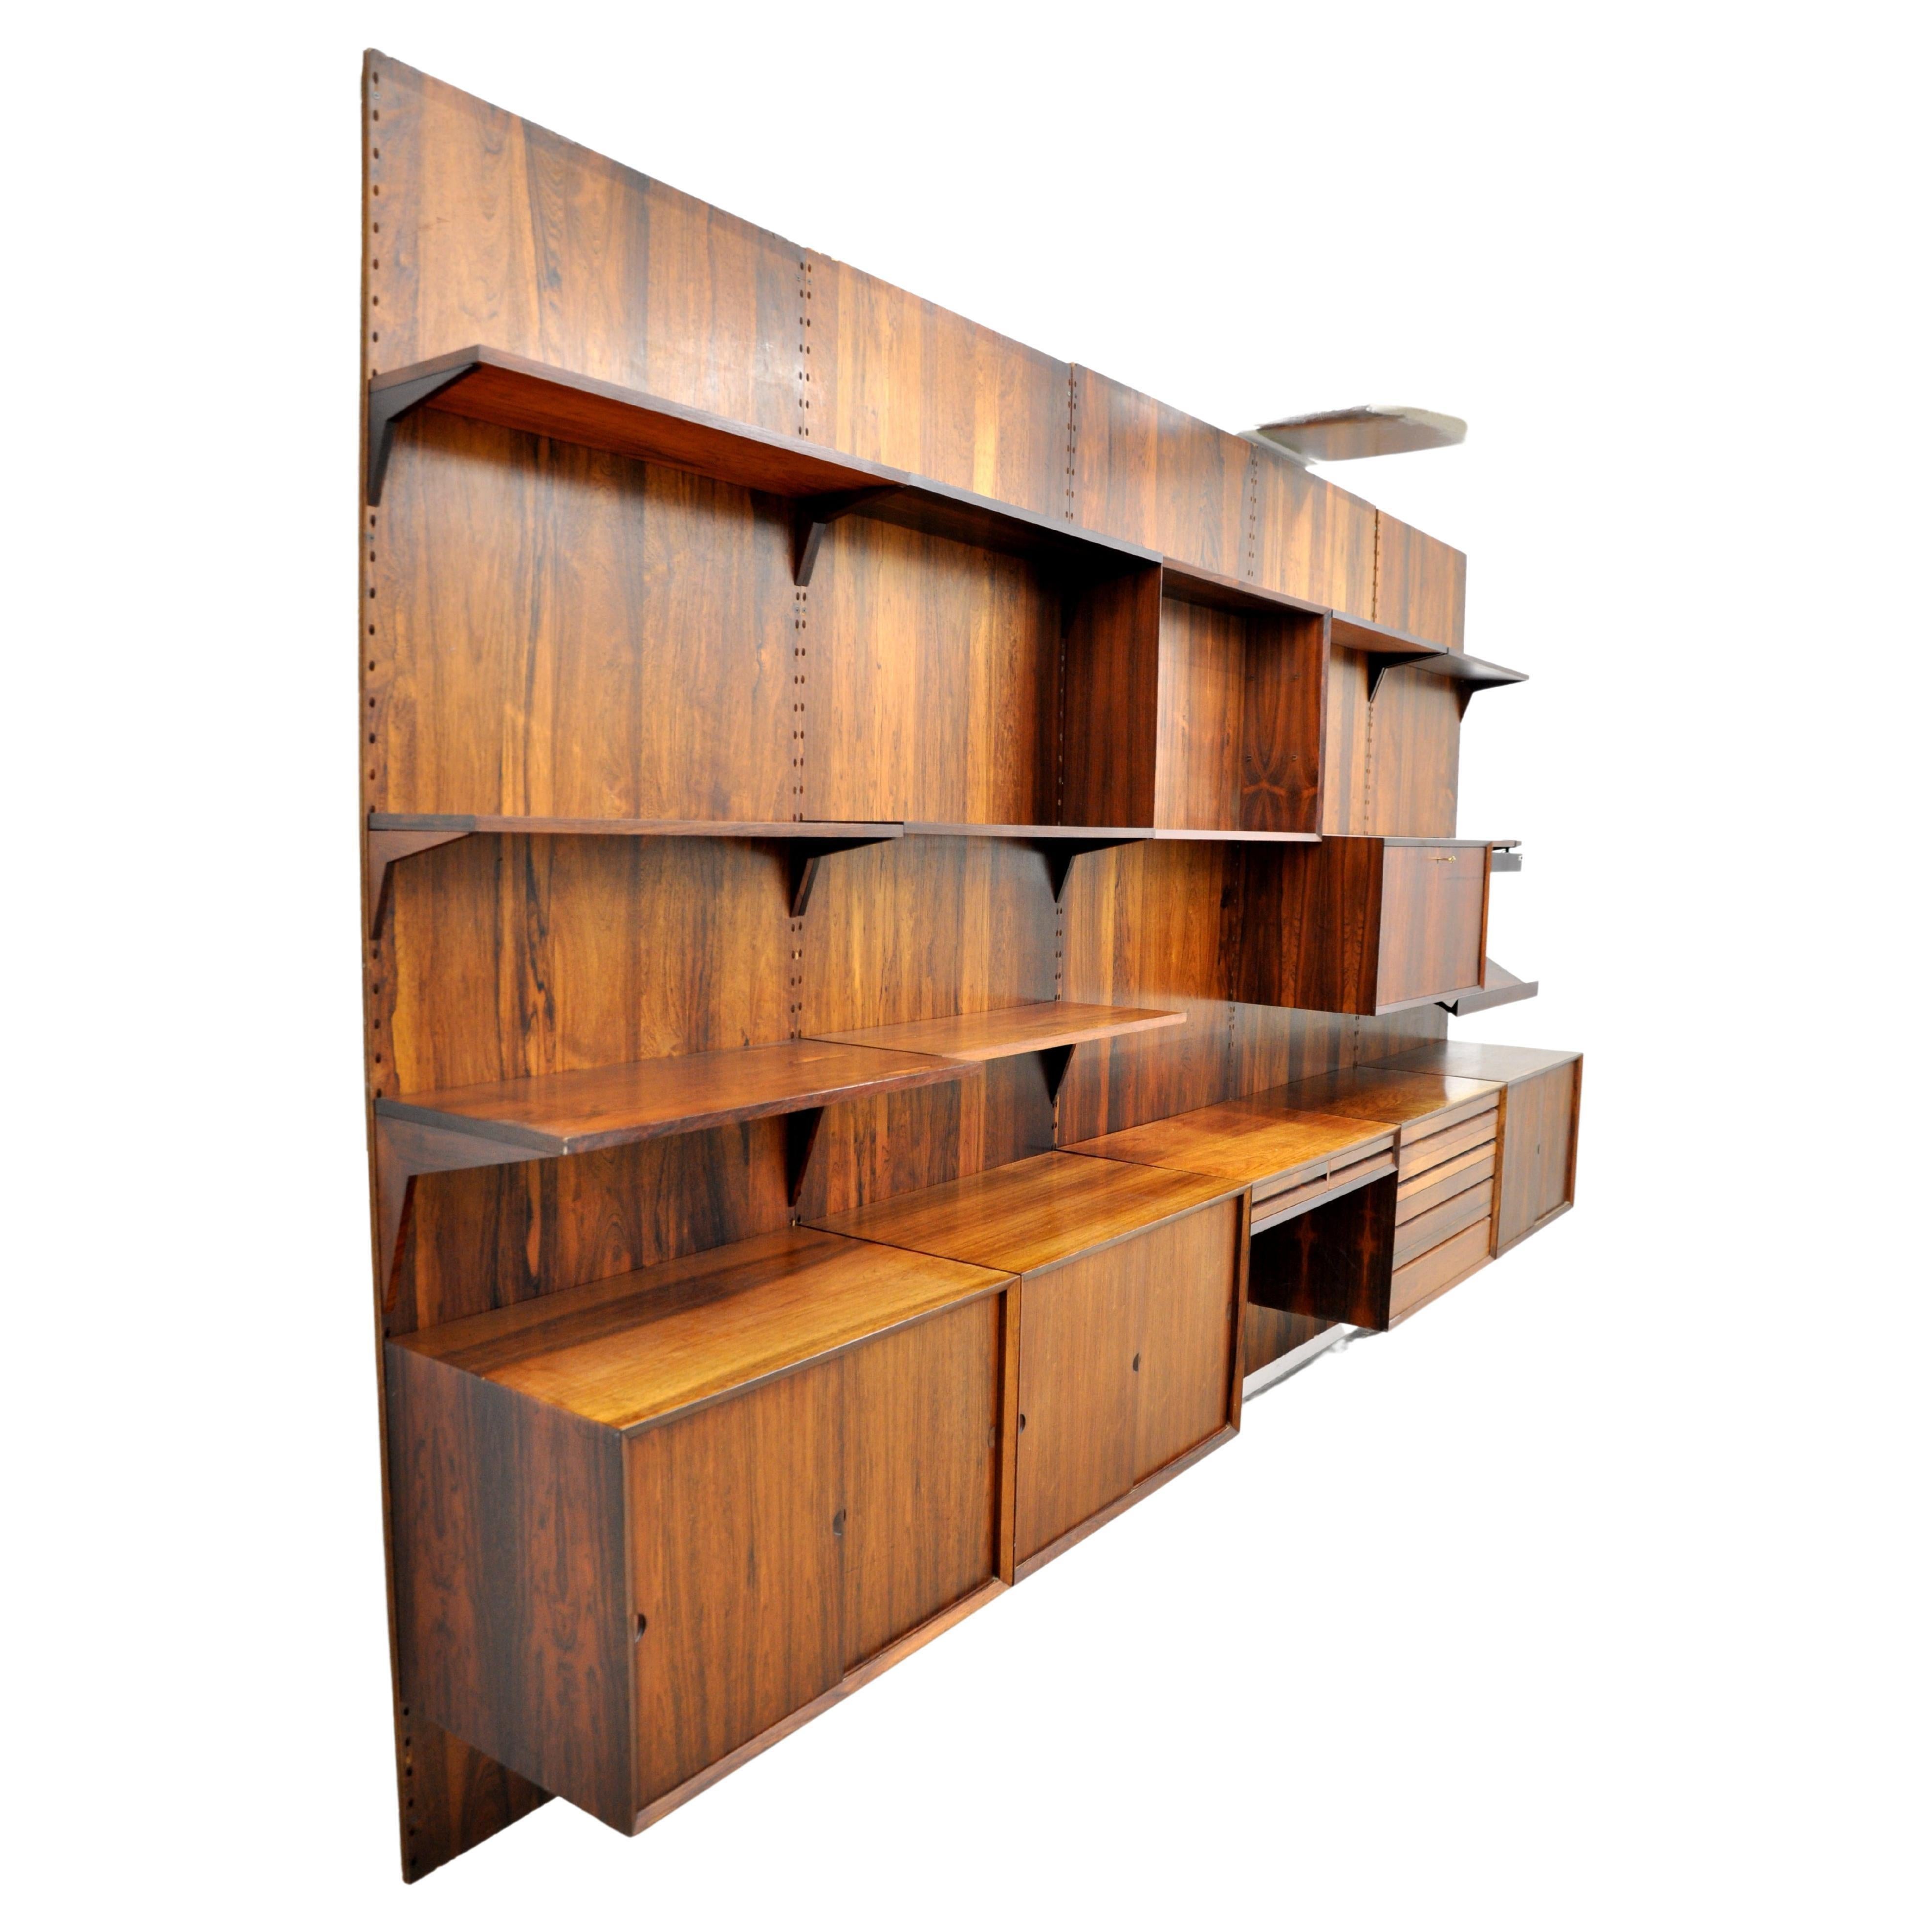 Midcentury Danish Modern five bay Brazilian rosewood modular wall shelving unit, designed by Poul Cadovius, manufactured by Royal System, Inc. 

The spectacular vintage wall system features components that can be interchanged and placed according to